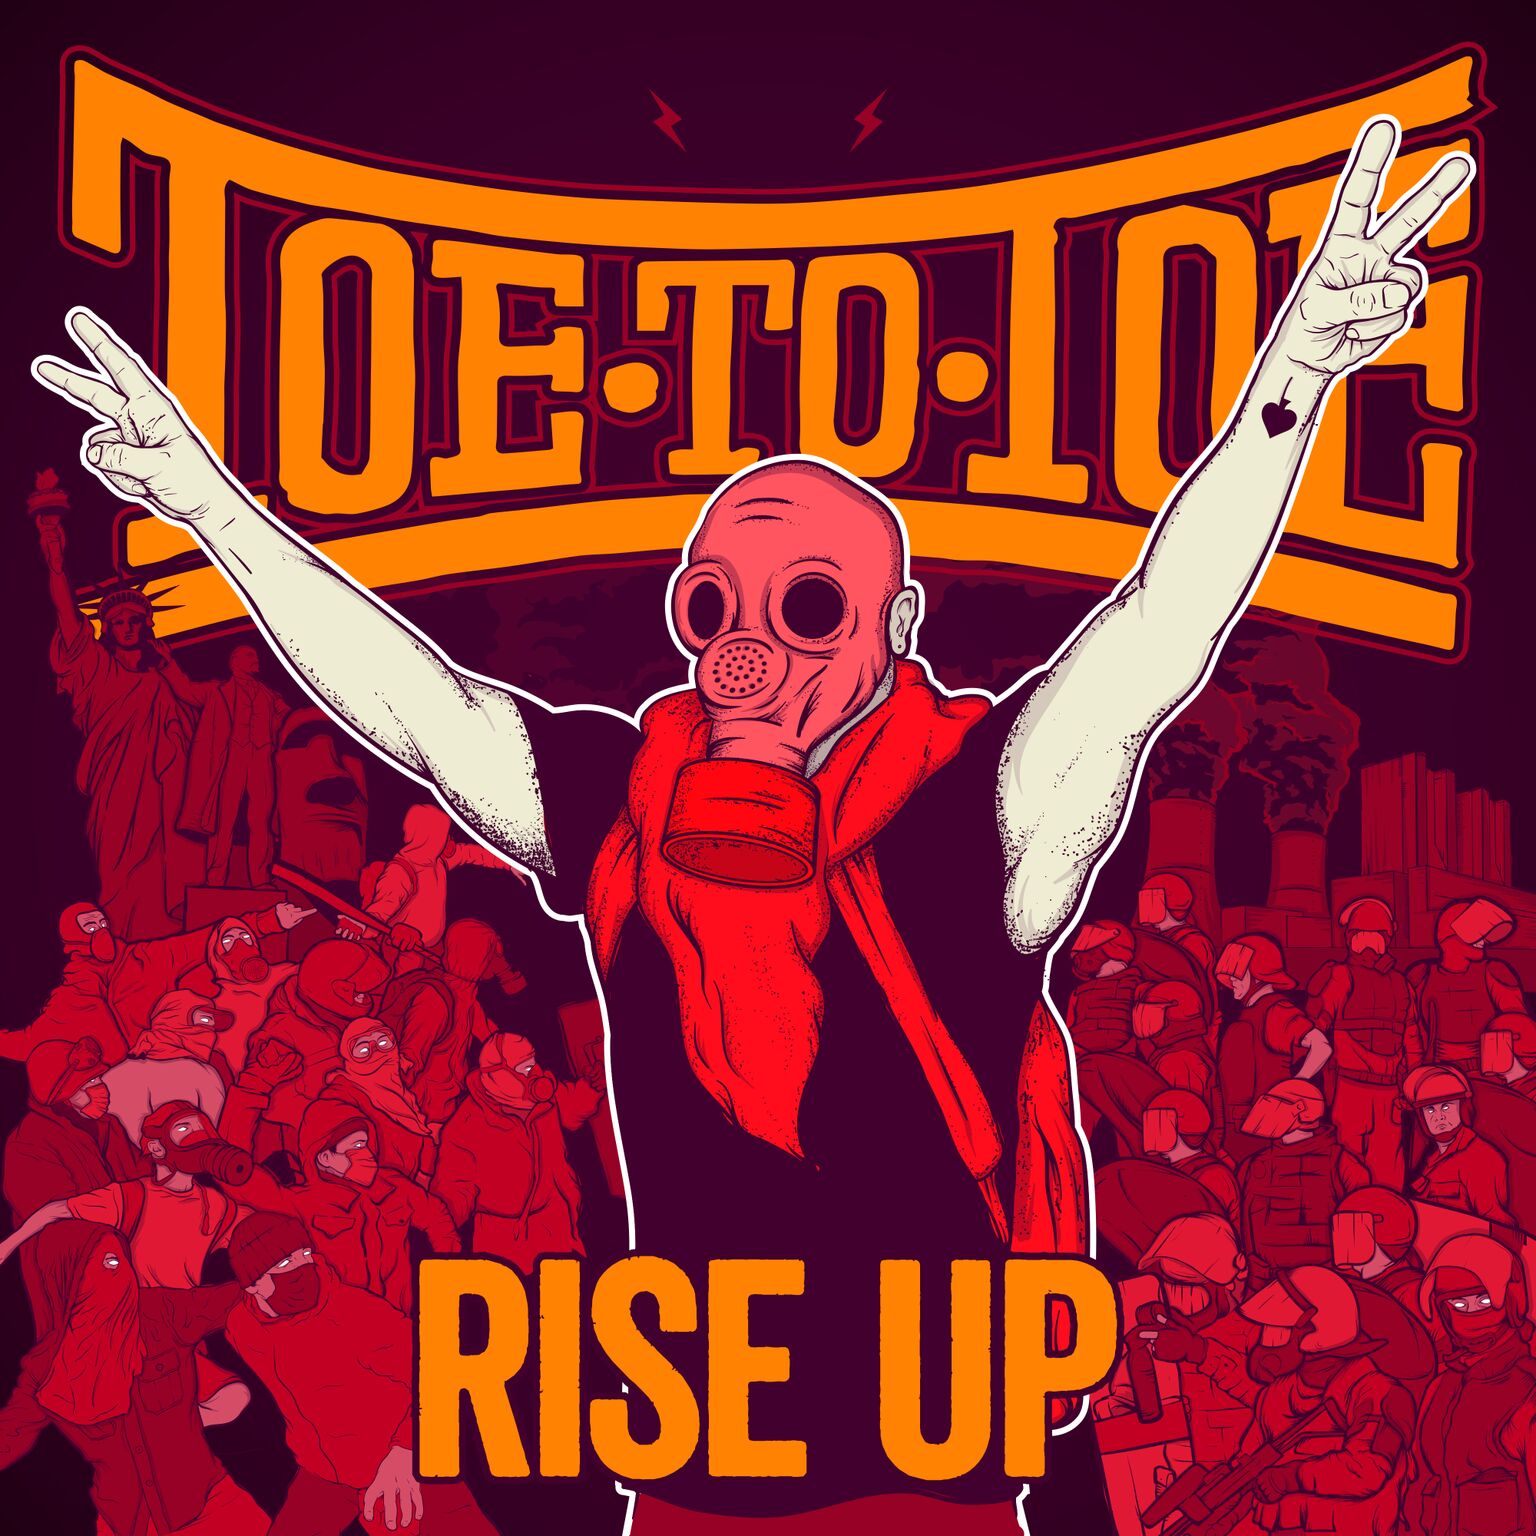 Toe To Toe To Release New Album ‘Rise Up’ In April